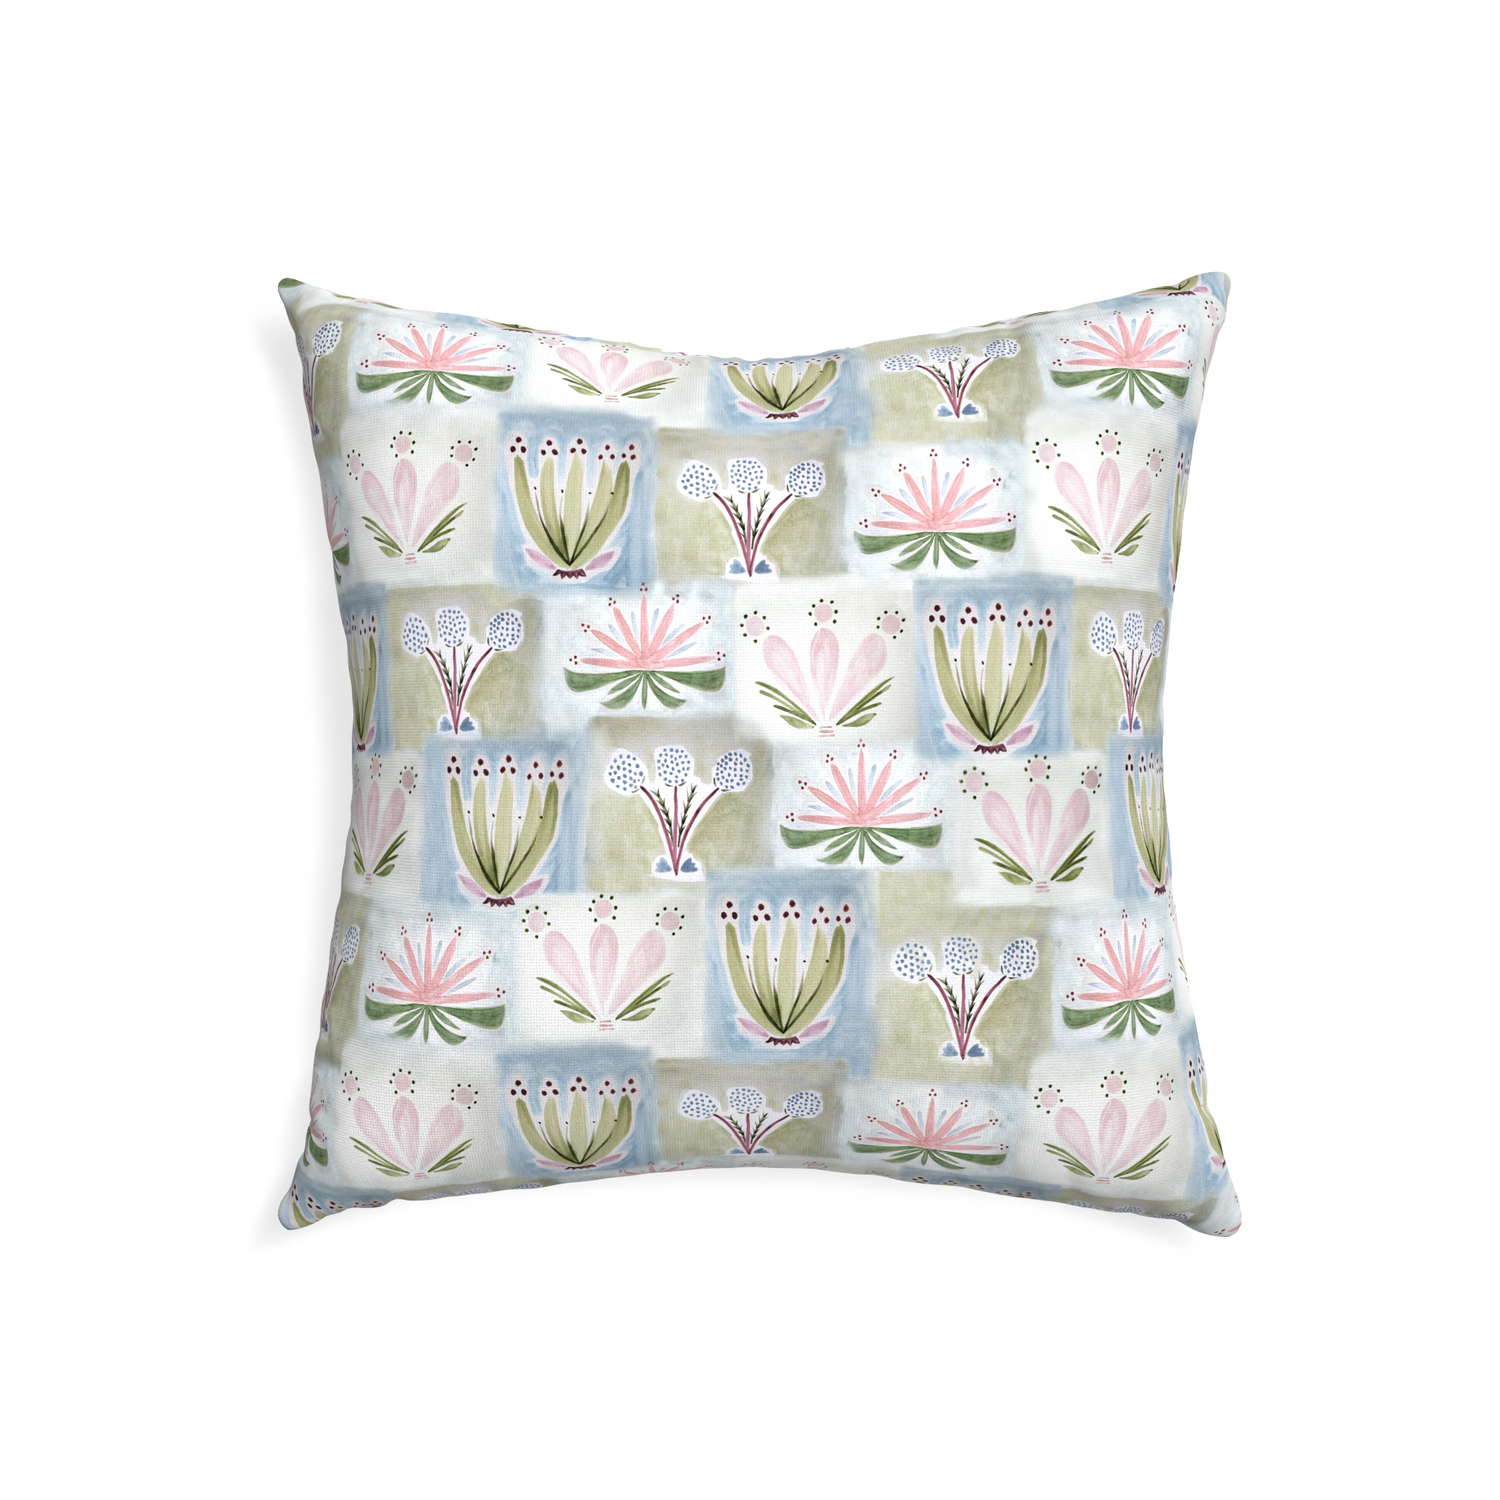 22-square harper custom hand-painted floralpillow with none on white background